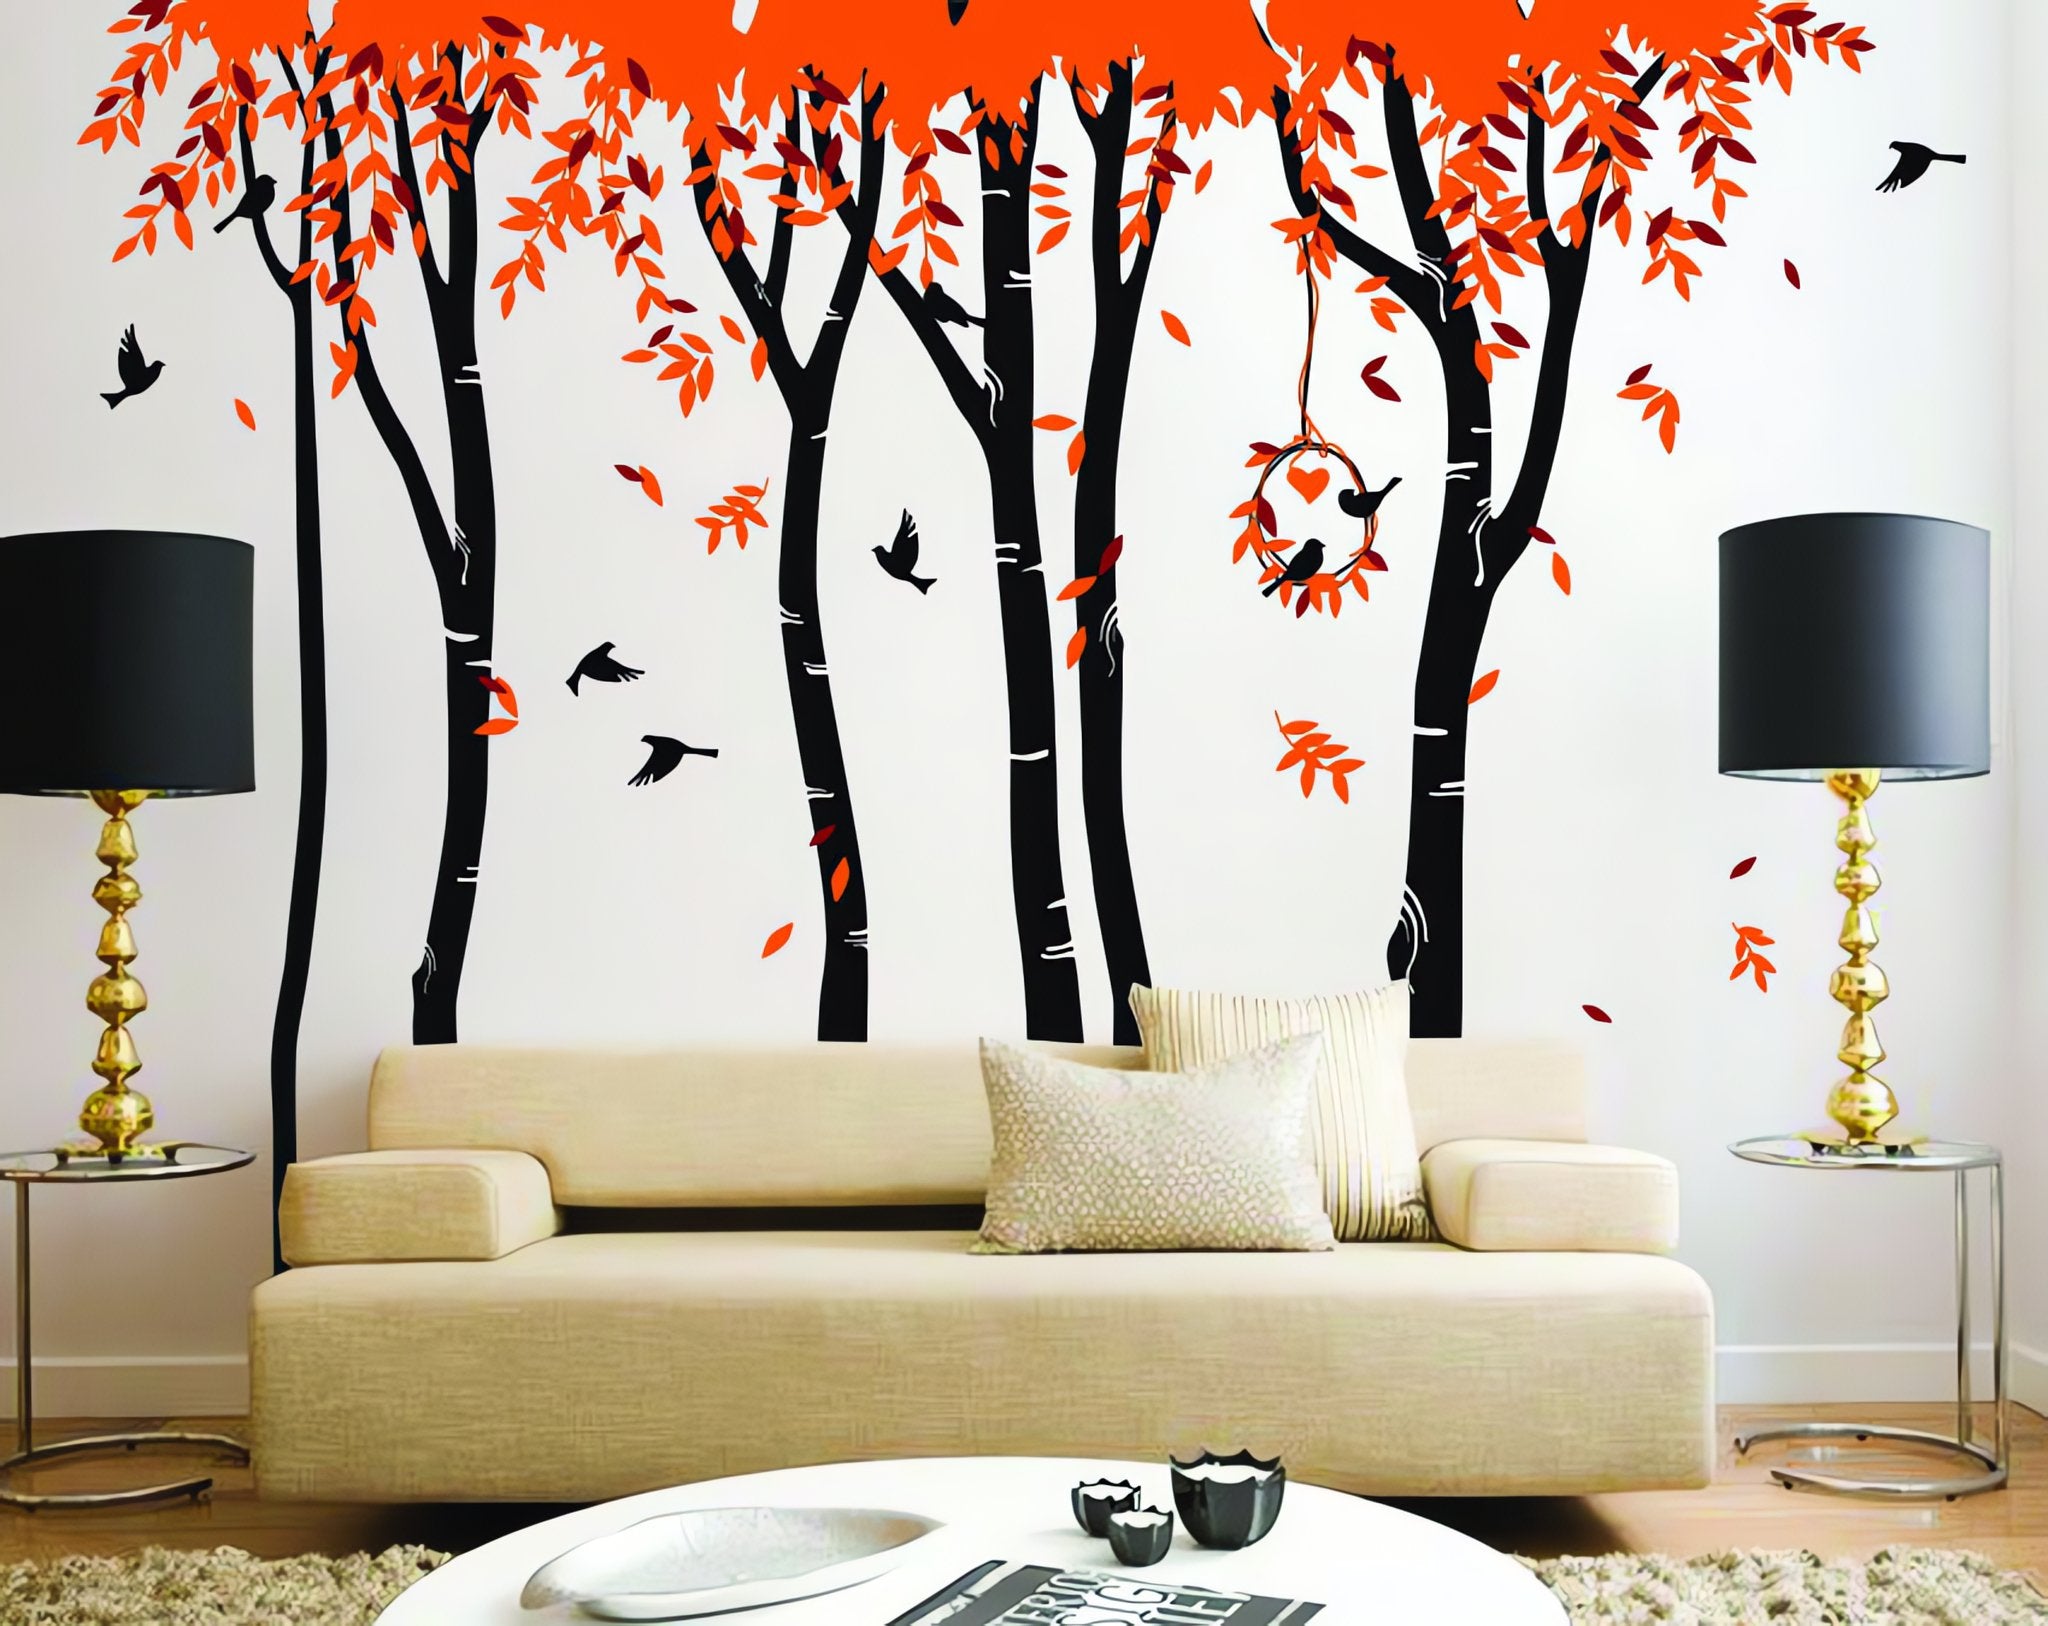 Tree wall sticker with falling leaves and birds in a living room with a couch, coffee table and lamps.